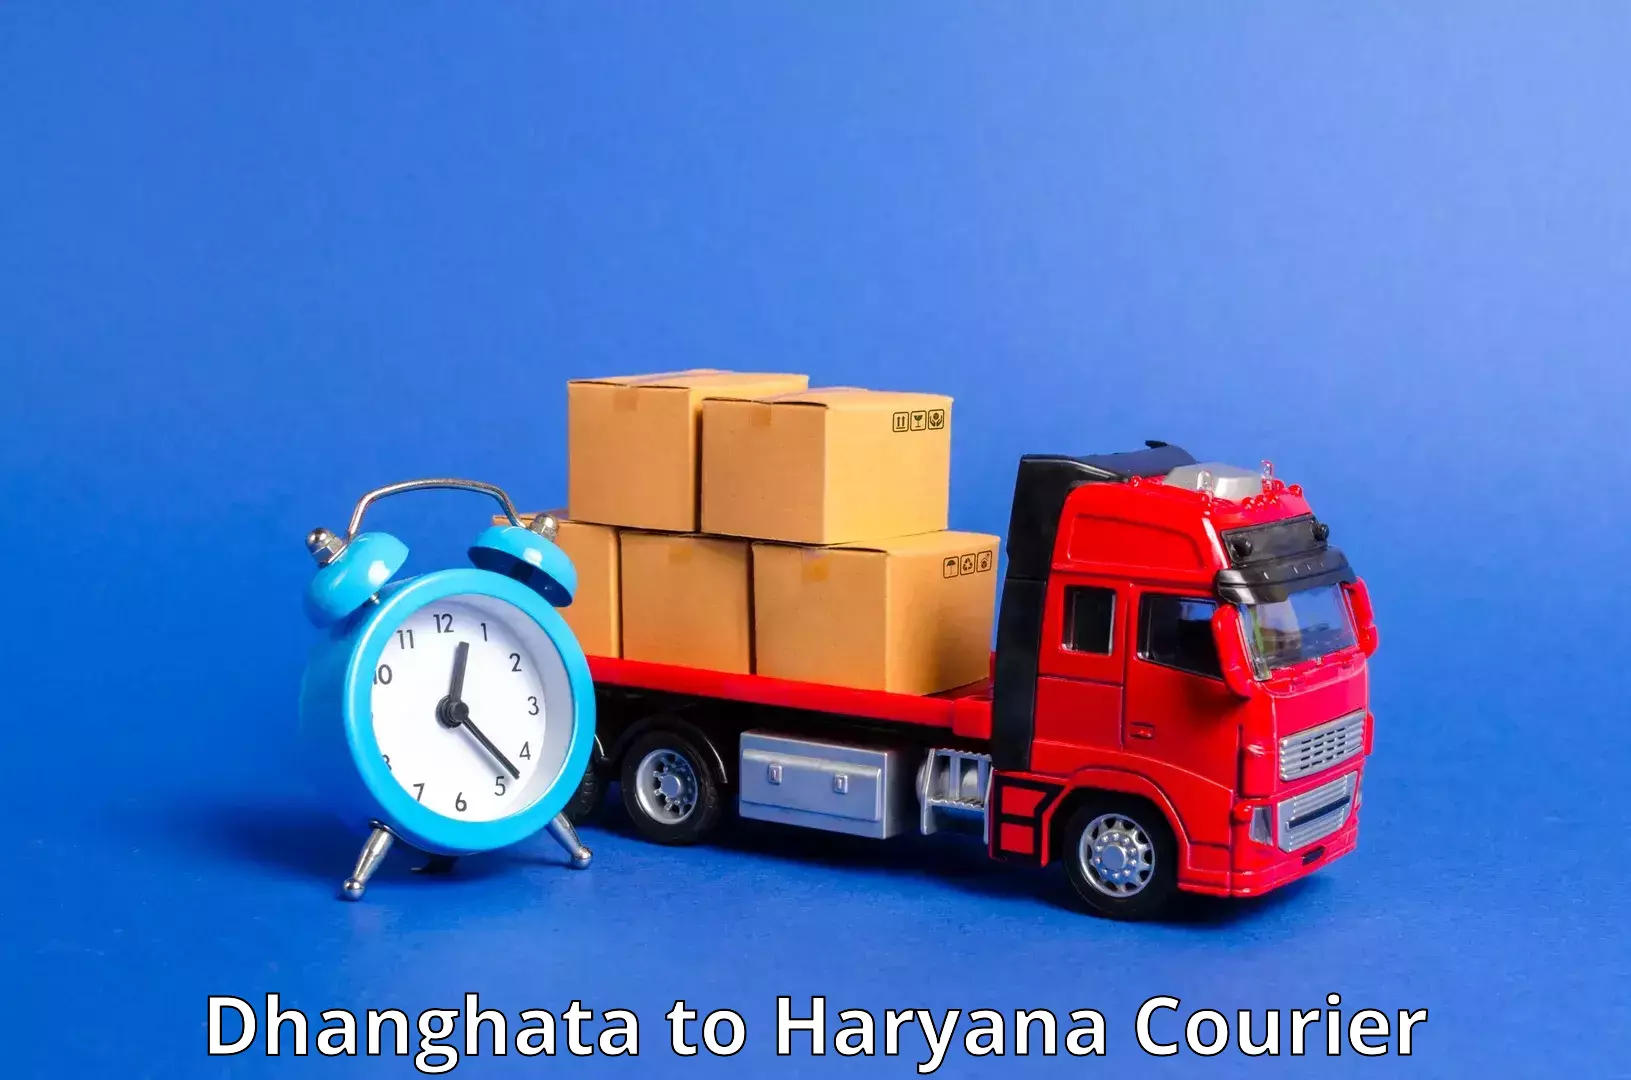 24-hour courier service Dhanghata to Faridabad